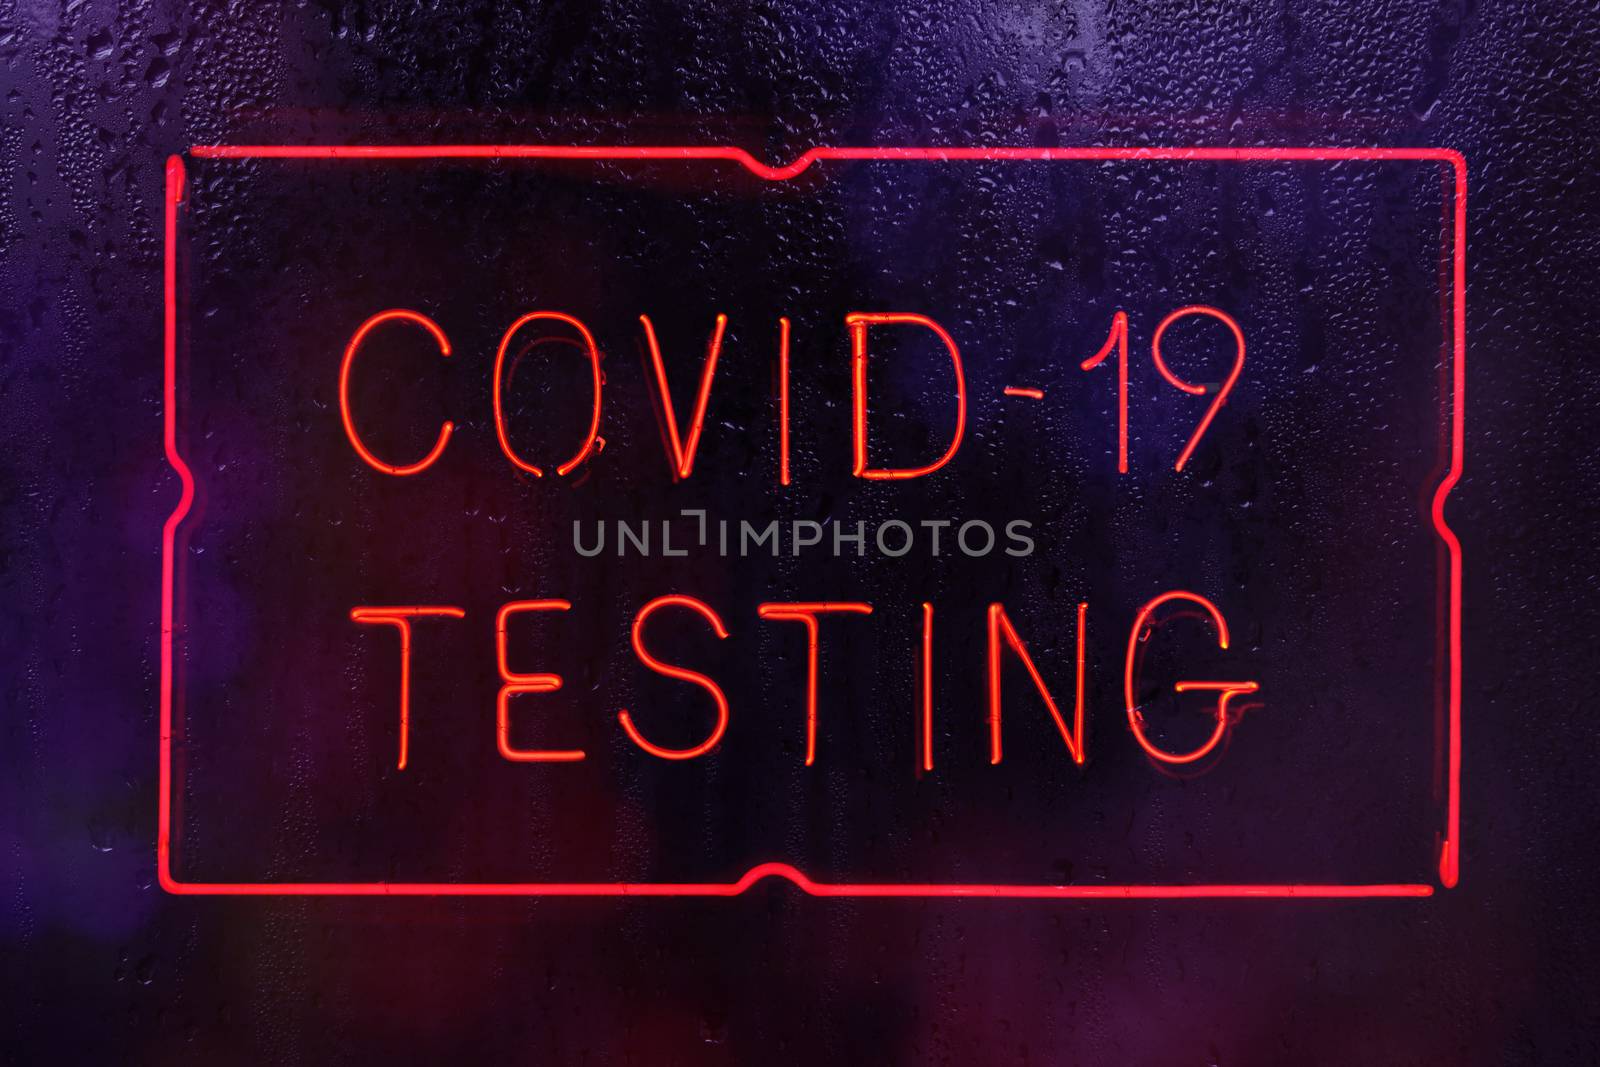 Covid-19 Testing Neon Sign in Rainy Window by Marti157900